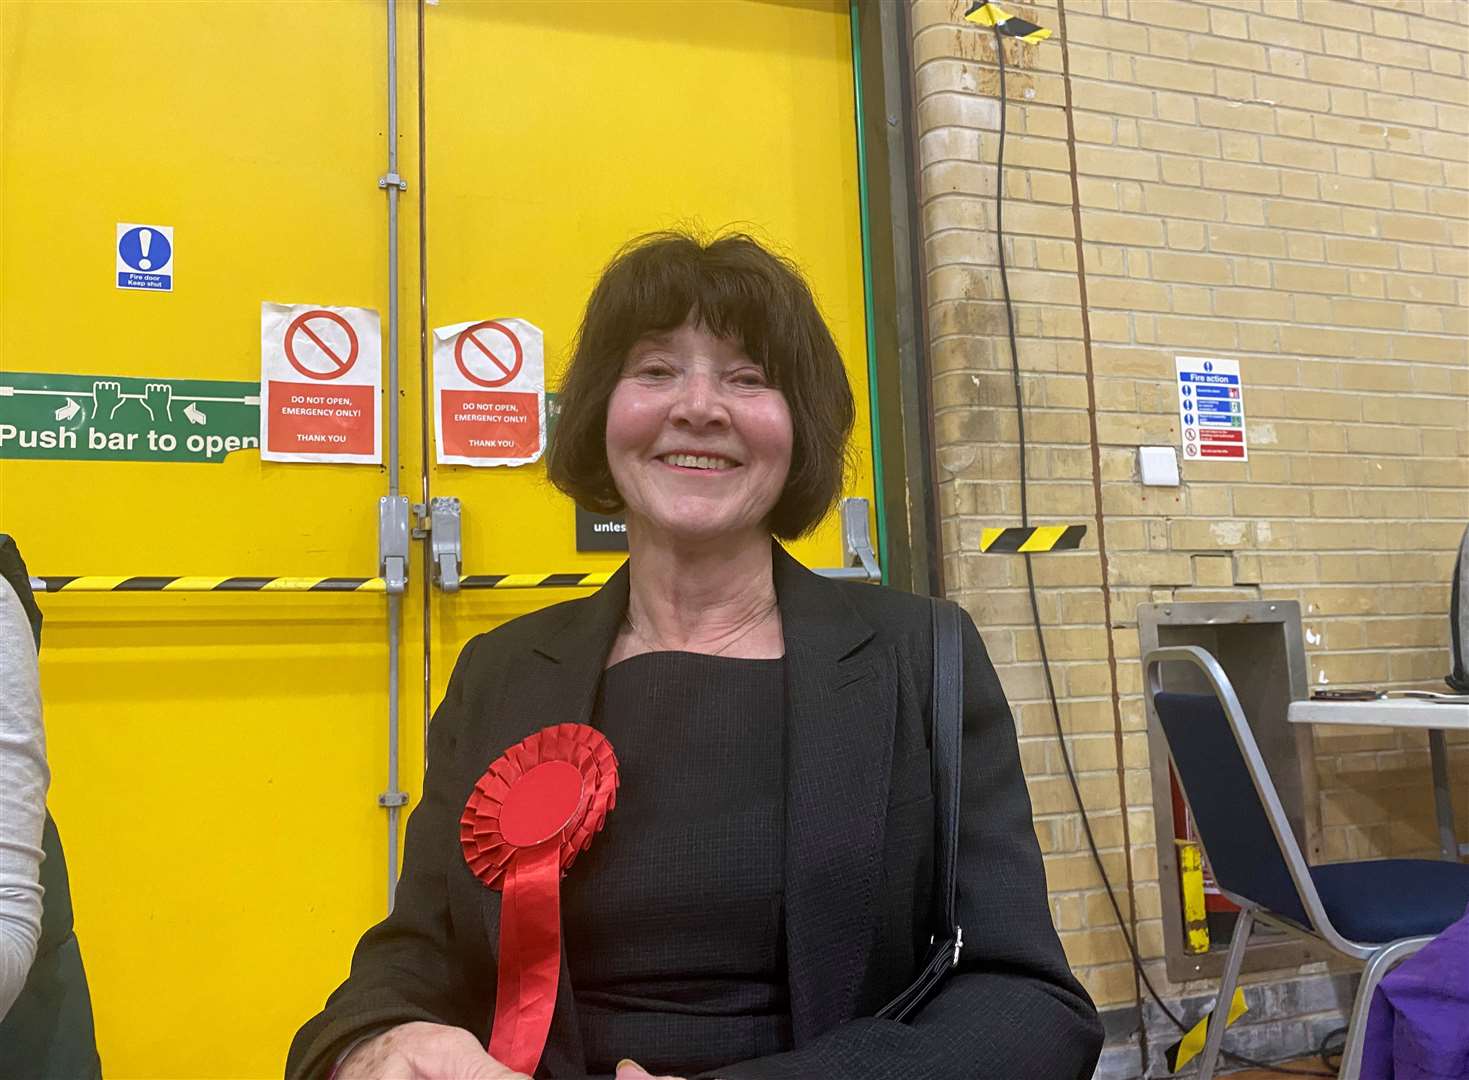 Caroline Jackson once again won the St Ann seat during the Swale Borough Council elections. Picture: Joe Harbert